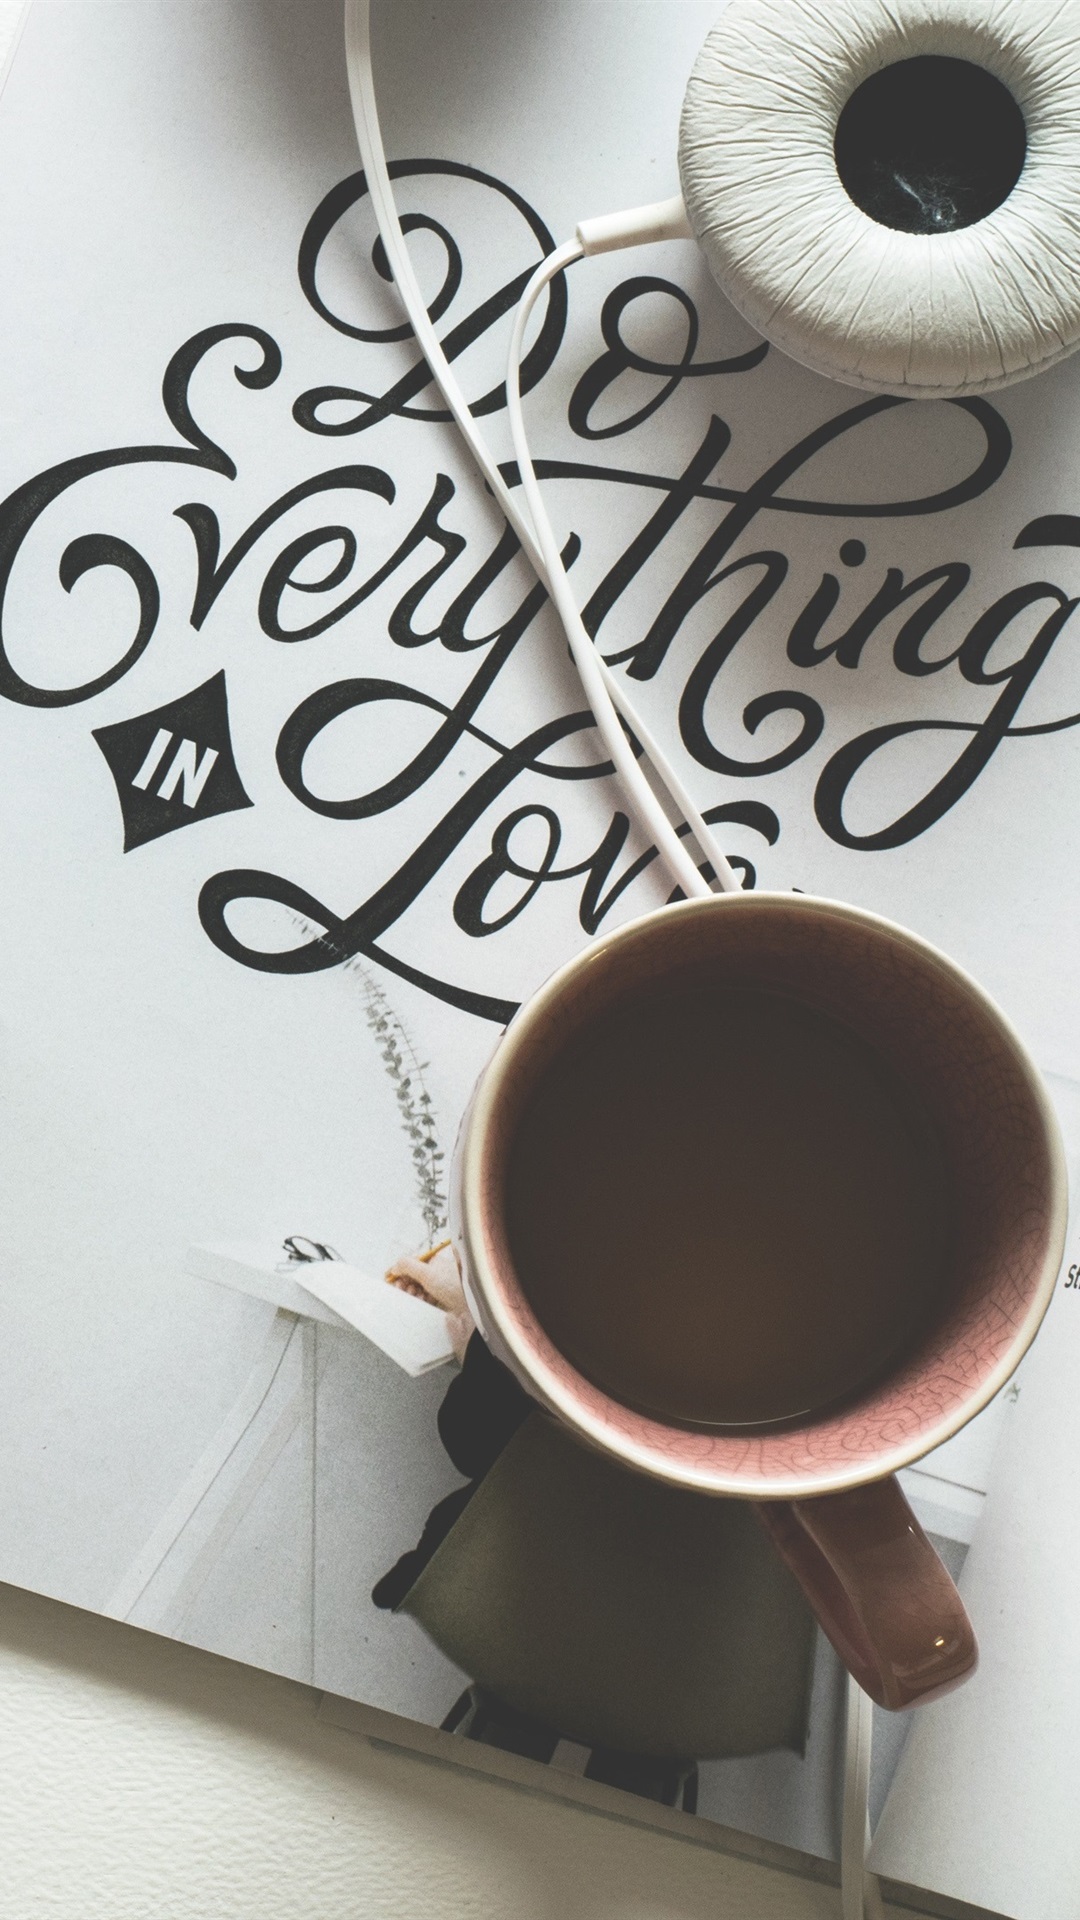 Iphone Wallpaper Coffee, Cup, Book, Watch, Phone - Hd Headphone Coffee Hd - HD Wallpaper 